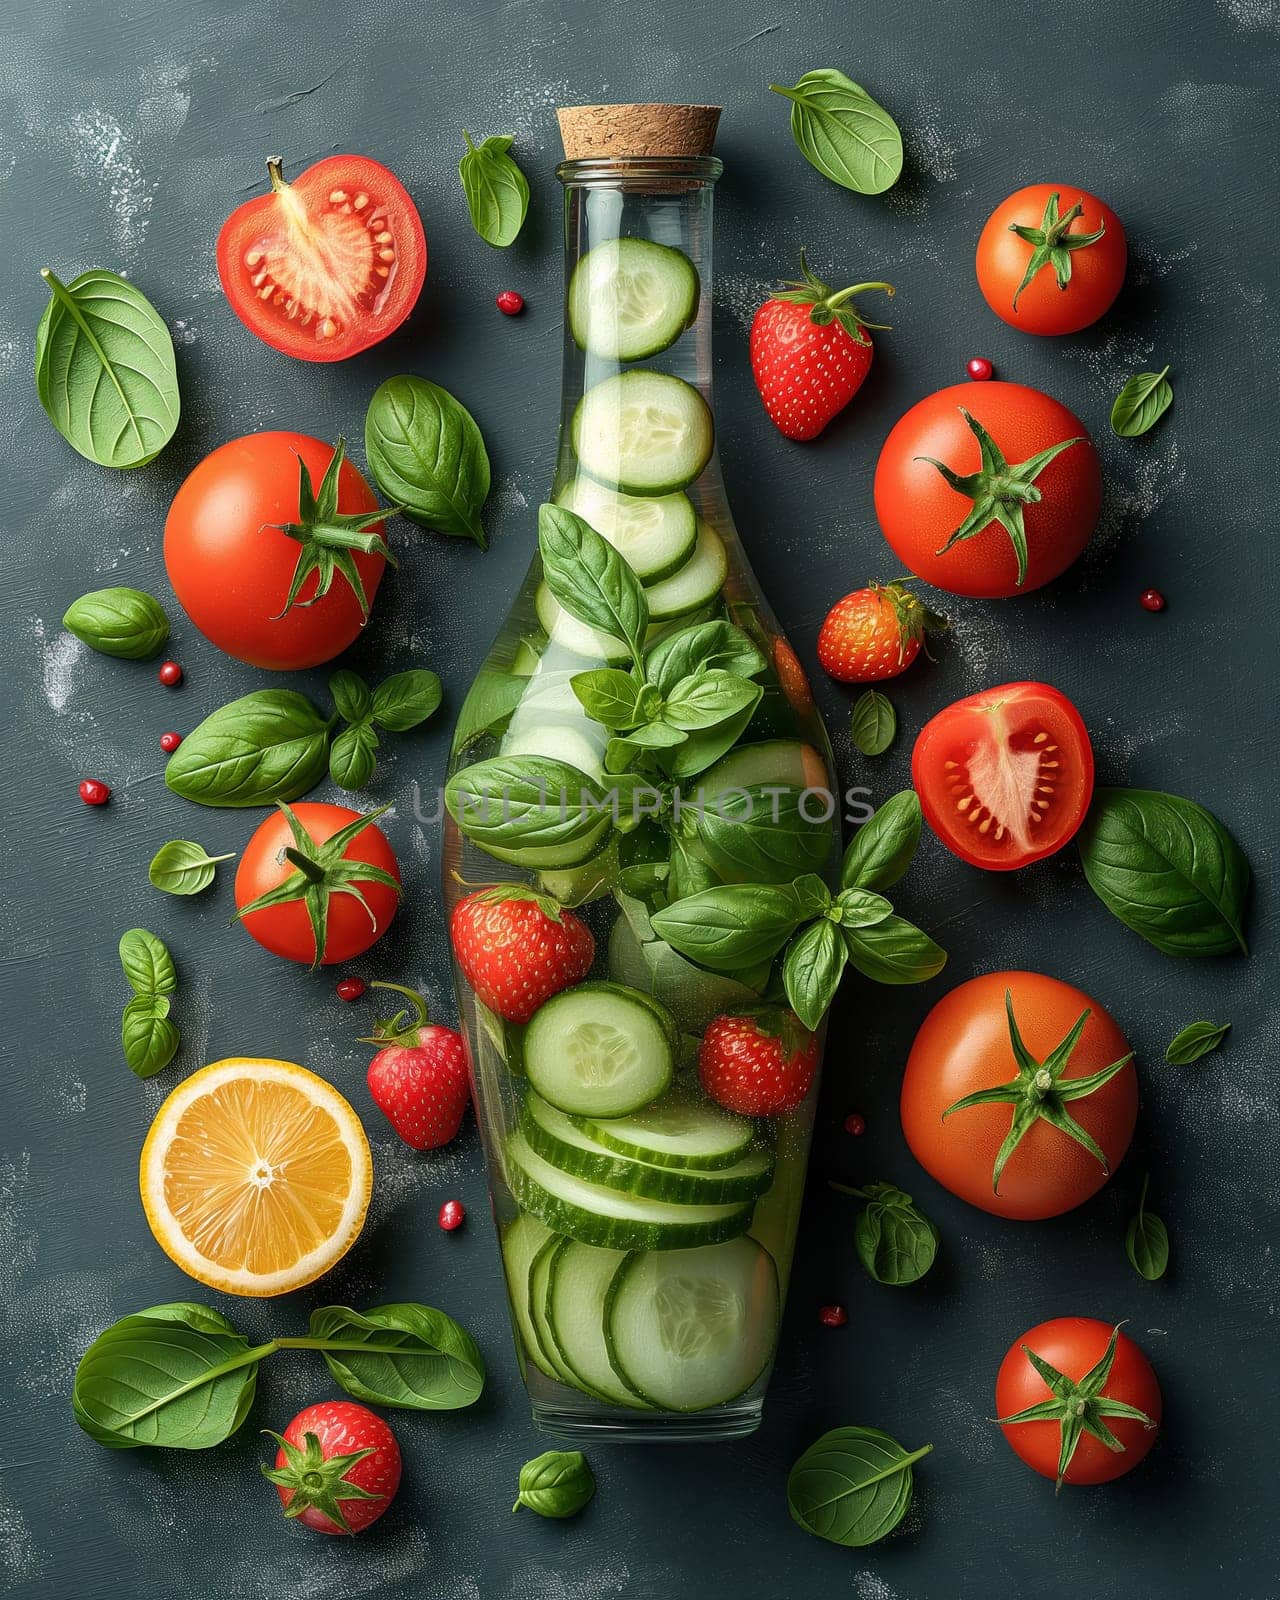 Glass Bottle With Cucumbers and Tomatoes. by Fischeron